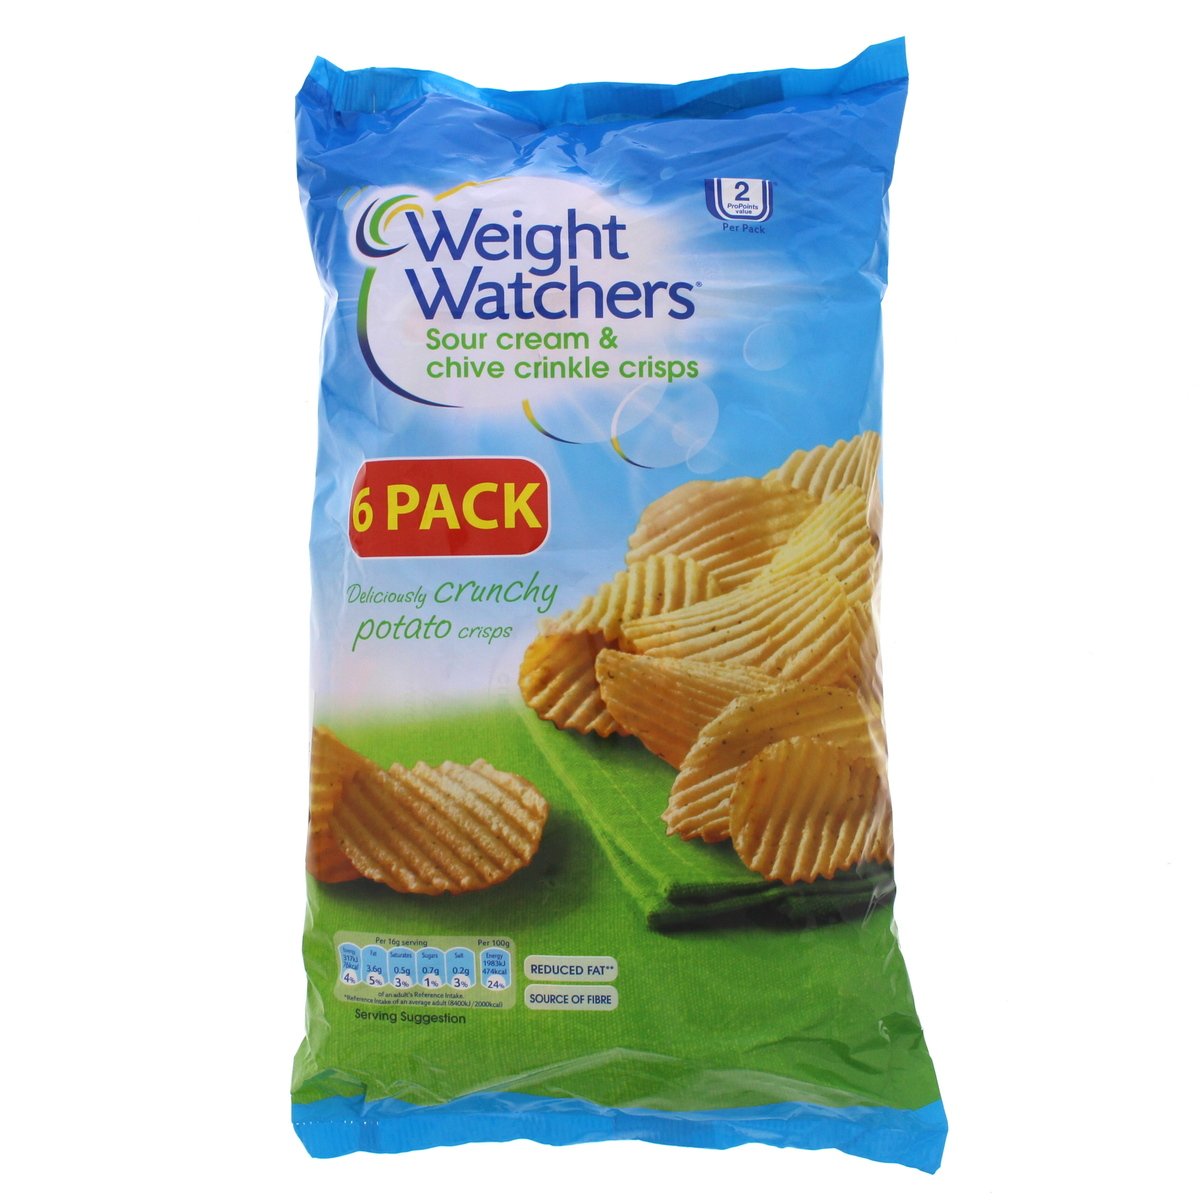 Weight Watchers Sour Cream & Chive Crinkle Crisps 6 x 16 g